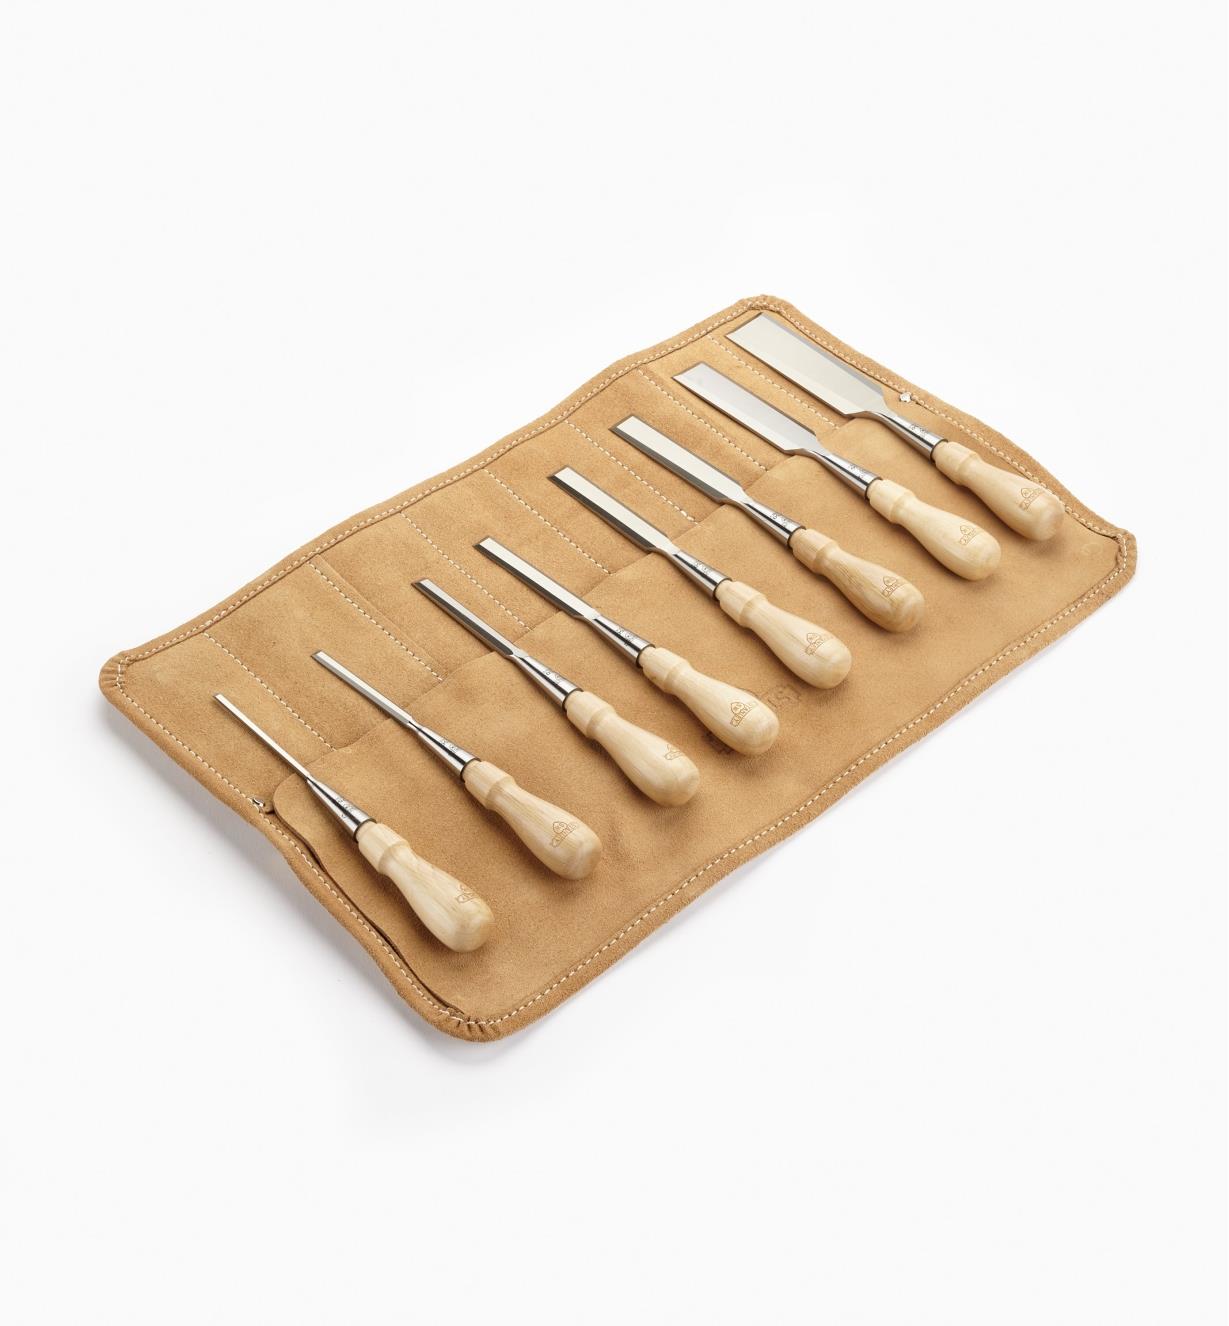 23K1950 - Sweetheart Chisels, Set of 8 (all sizes)